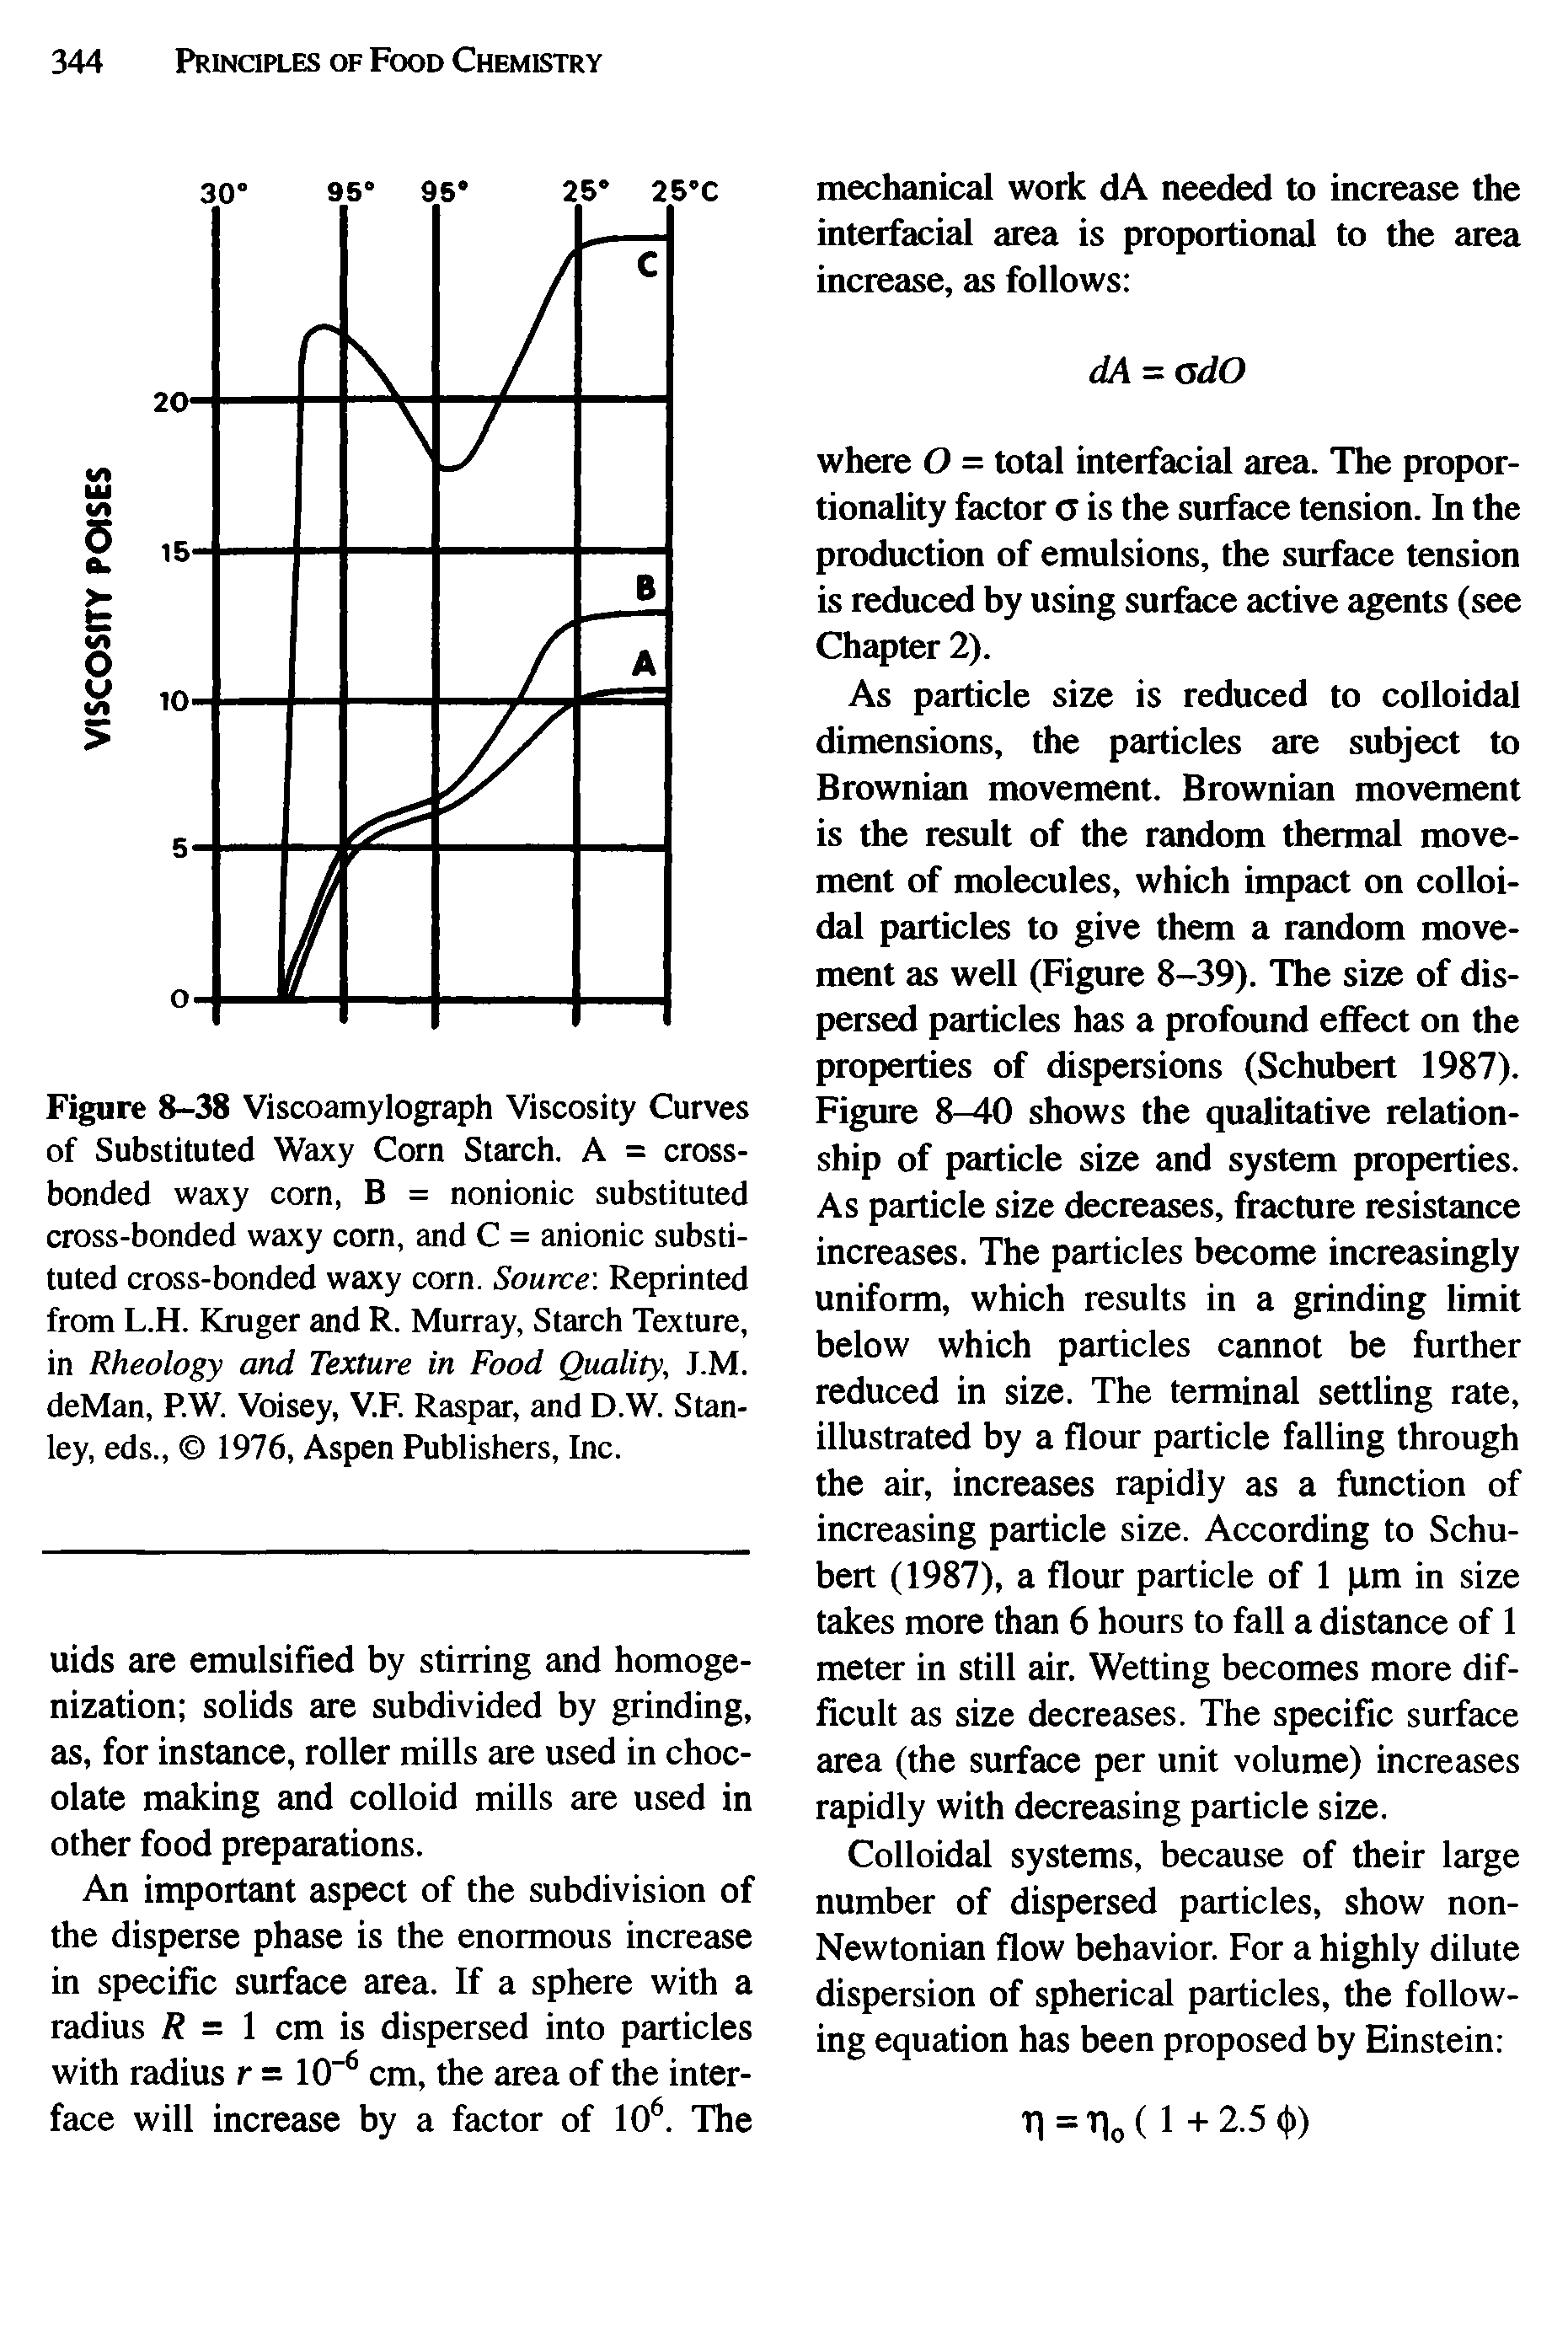 Figure 8-38 Viscoamylograph Viscosity Curves of Substituted Waxy Corn Starch. A = cross-bonded waxy corn, B = nonionic substituted cross-bonded waxy corn, and C = anionic substituted cross-bonded waxy corn. Source Reprinted from L.H. Kruger and R. Murray, Starch Texture, in Rheology and Texture in Food Quality, J.M. deMan, P.W. Voisey, V.F. Raspar, and D.W. Stanley, eds., 1976, Aspen Publishers, Inc.